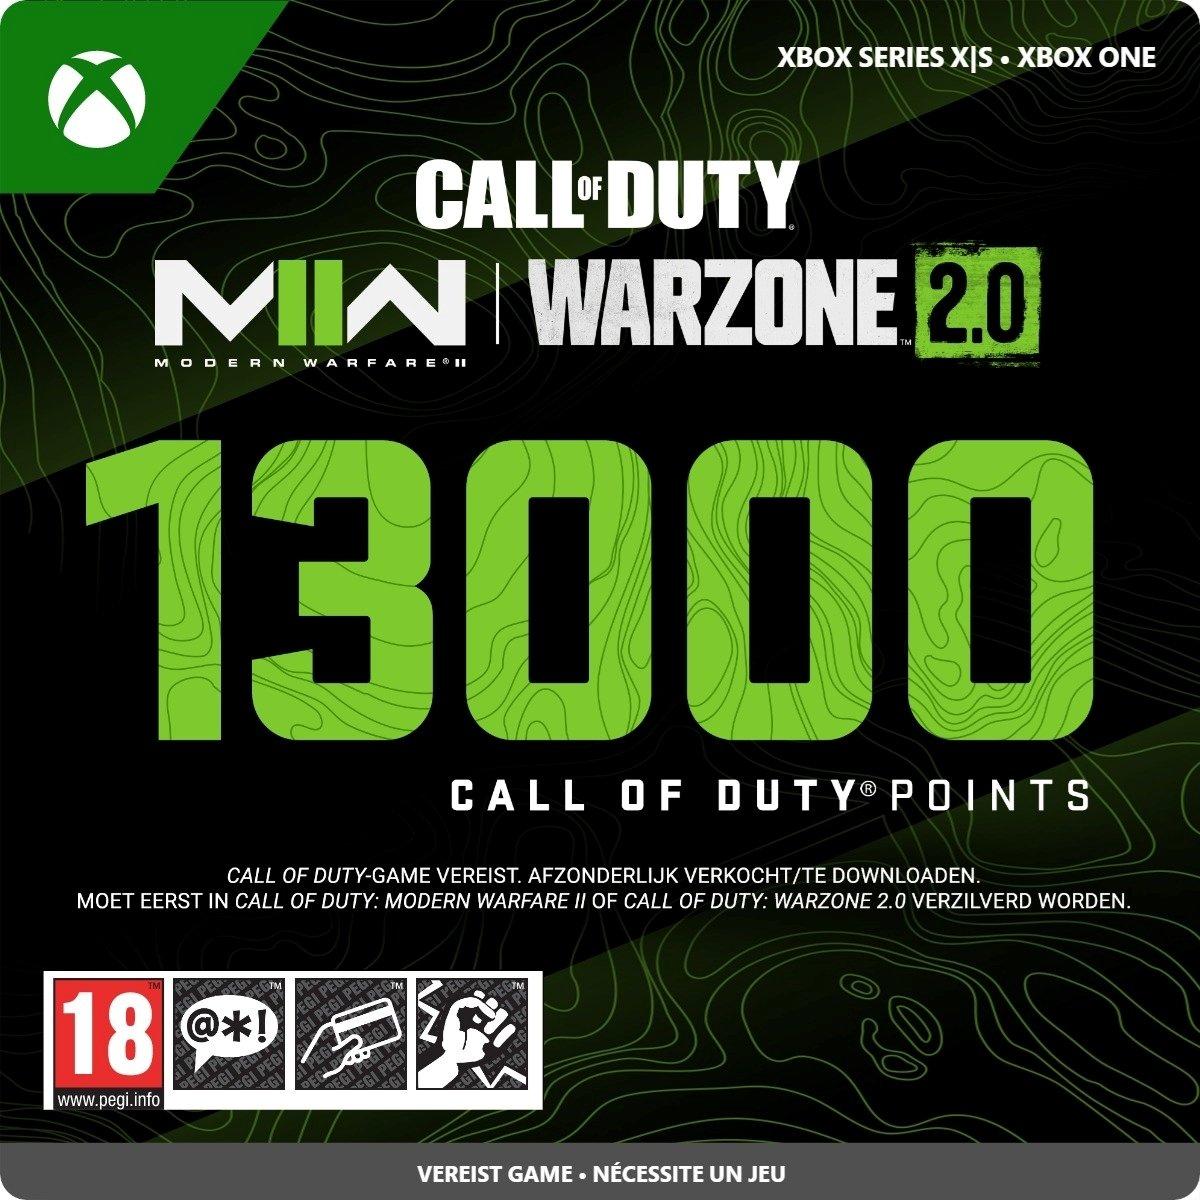 Call of Duty Points - 13,000 - Xbox Series X/Xbox One - Currency | 7F6-00505 (f05e5d11-4e44-cb4b-8f30-822007d6d5e6)